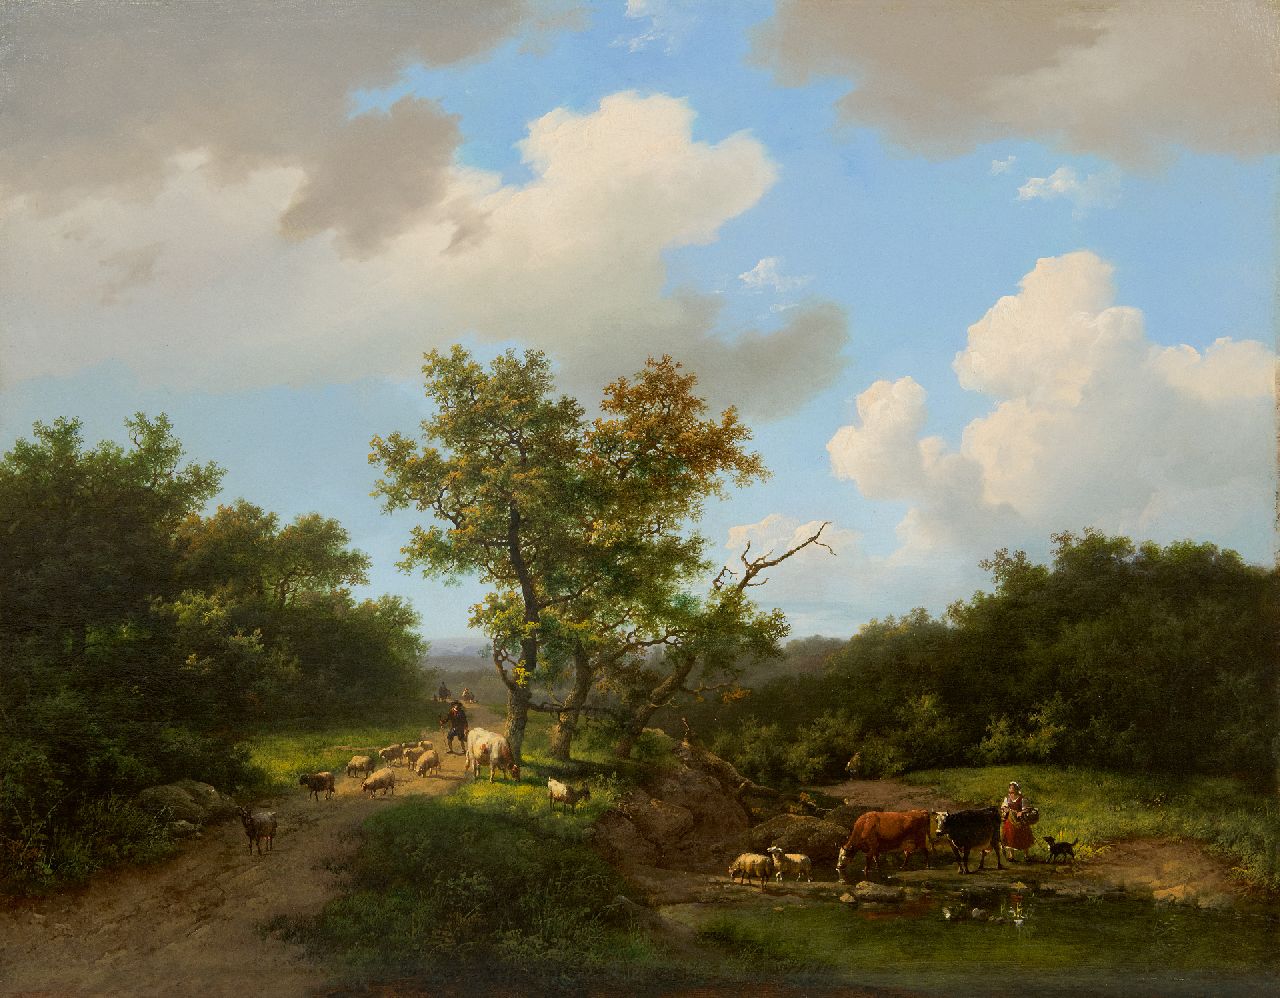 Koekkoek/Verboeckhoven M.A.I/E.J.  | Marinus Adrianus/Eugène Joseph Koekkoek/Verboeckhoven, Livestock at a watering hole, oil on panel 44.3 x 56.3 cm, signed l.l. 'M.A. Koekkoek' and dated 1853